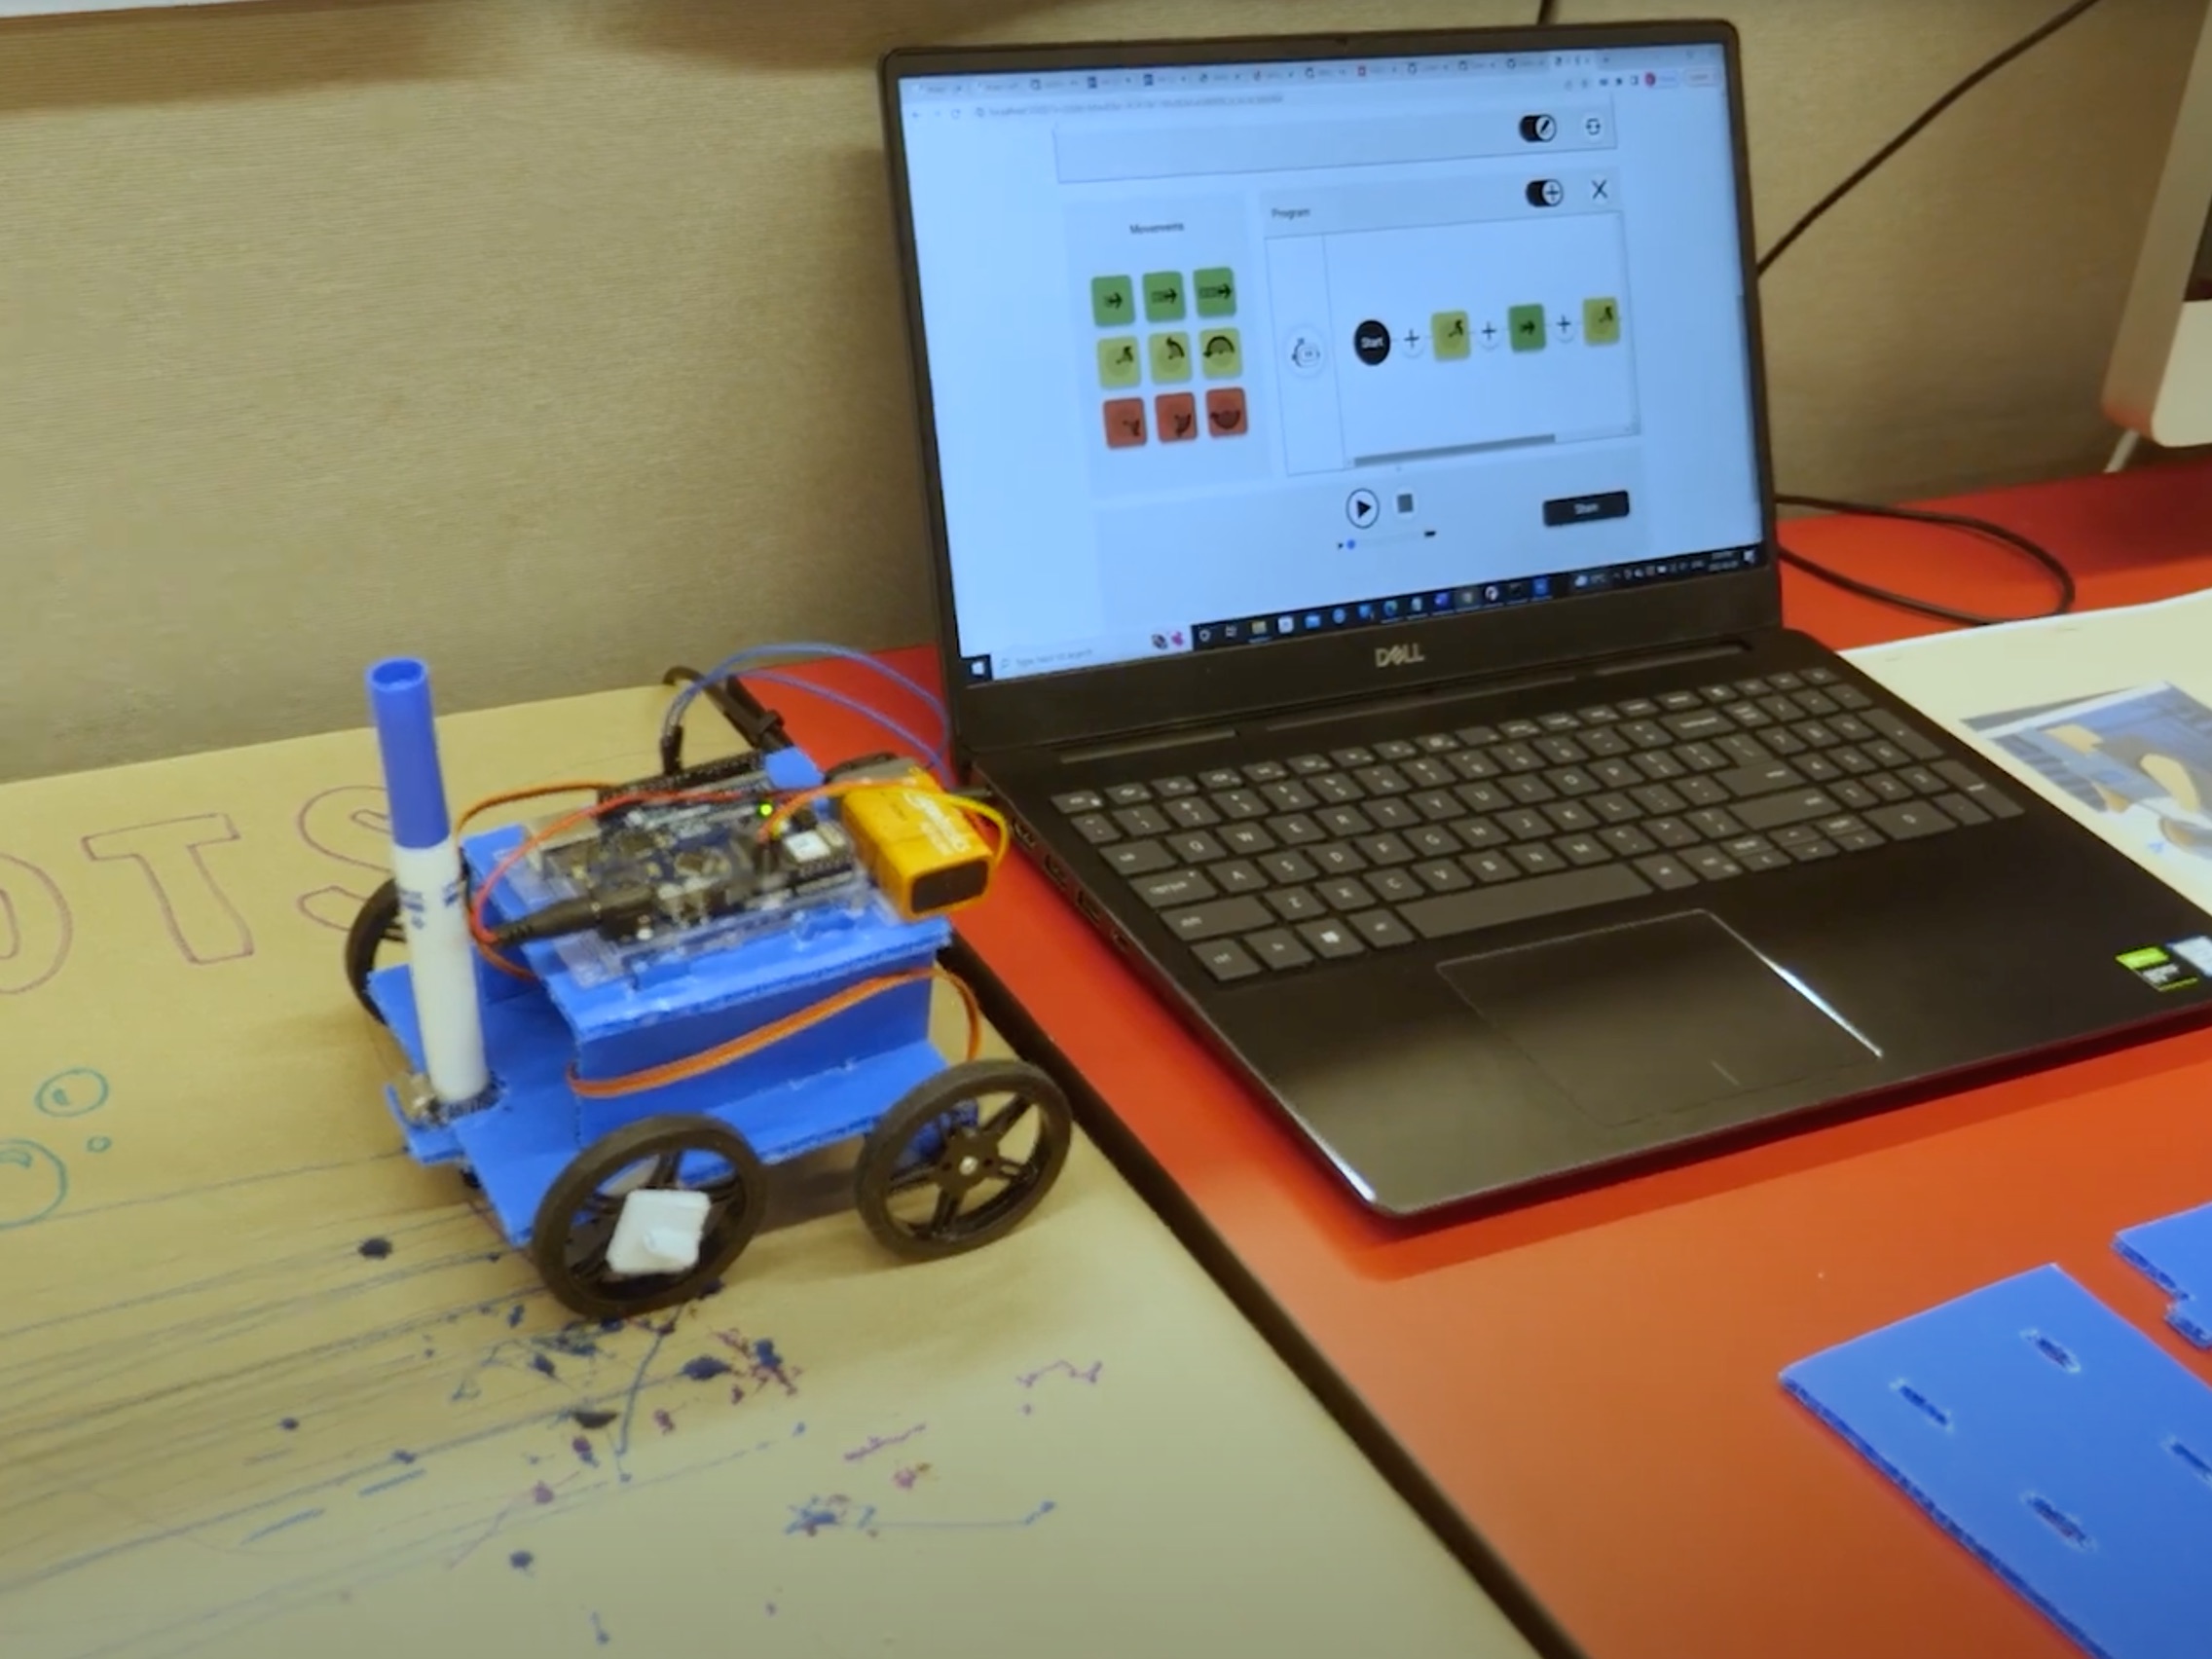 Image of a blue robot with four black wheels and a blue marker mounted on the front of the chassis. Next to it, a black laptop computer on an orange desk is running Weavly in a web browser.